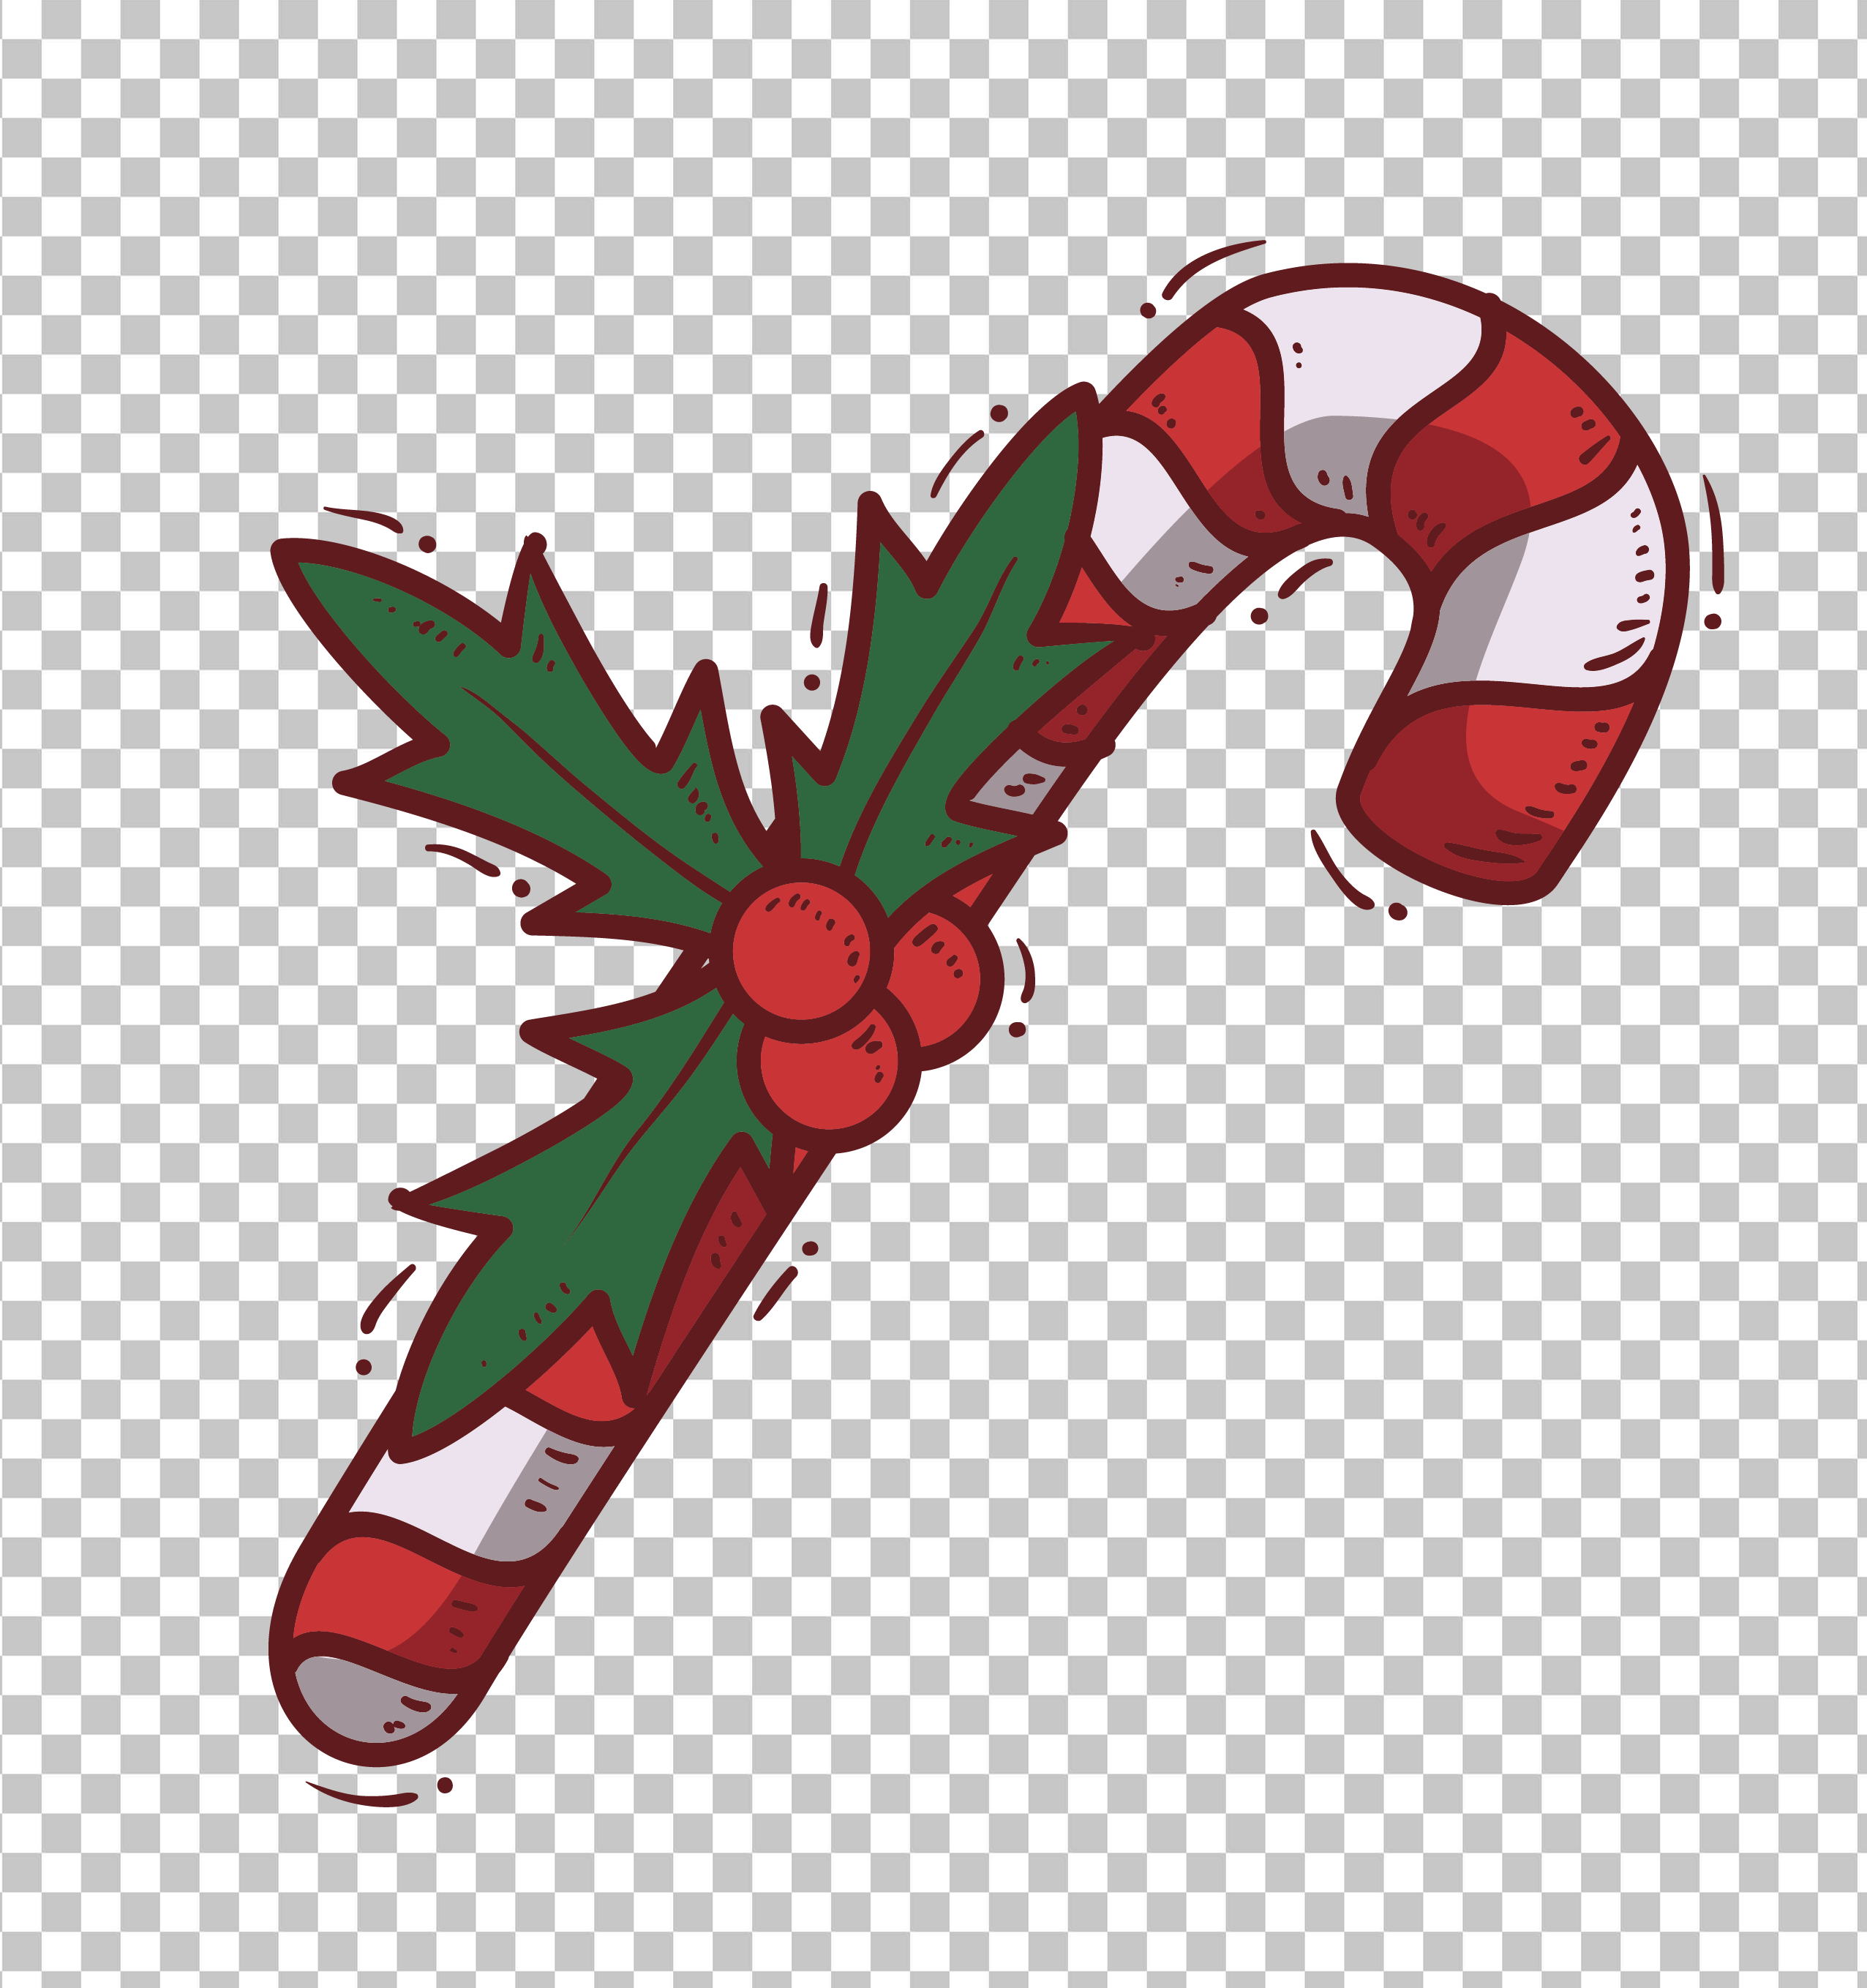 Cartoon Candy Cane PNG Image